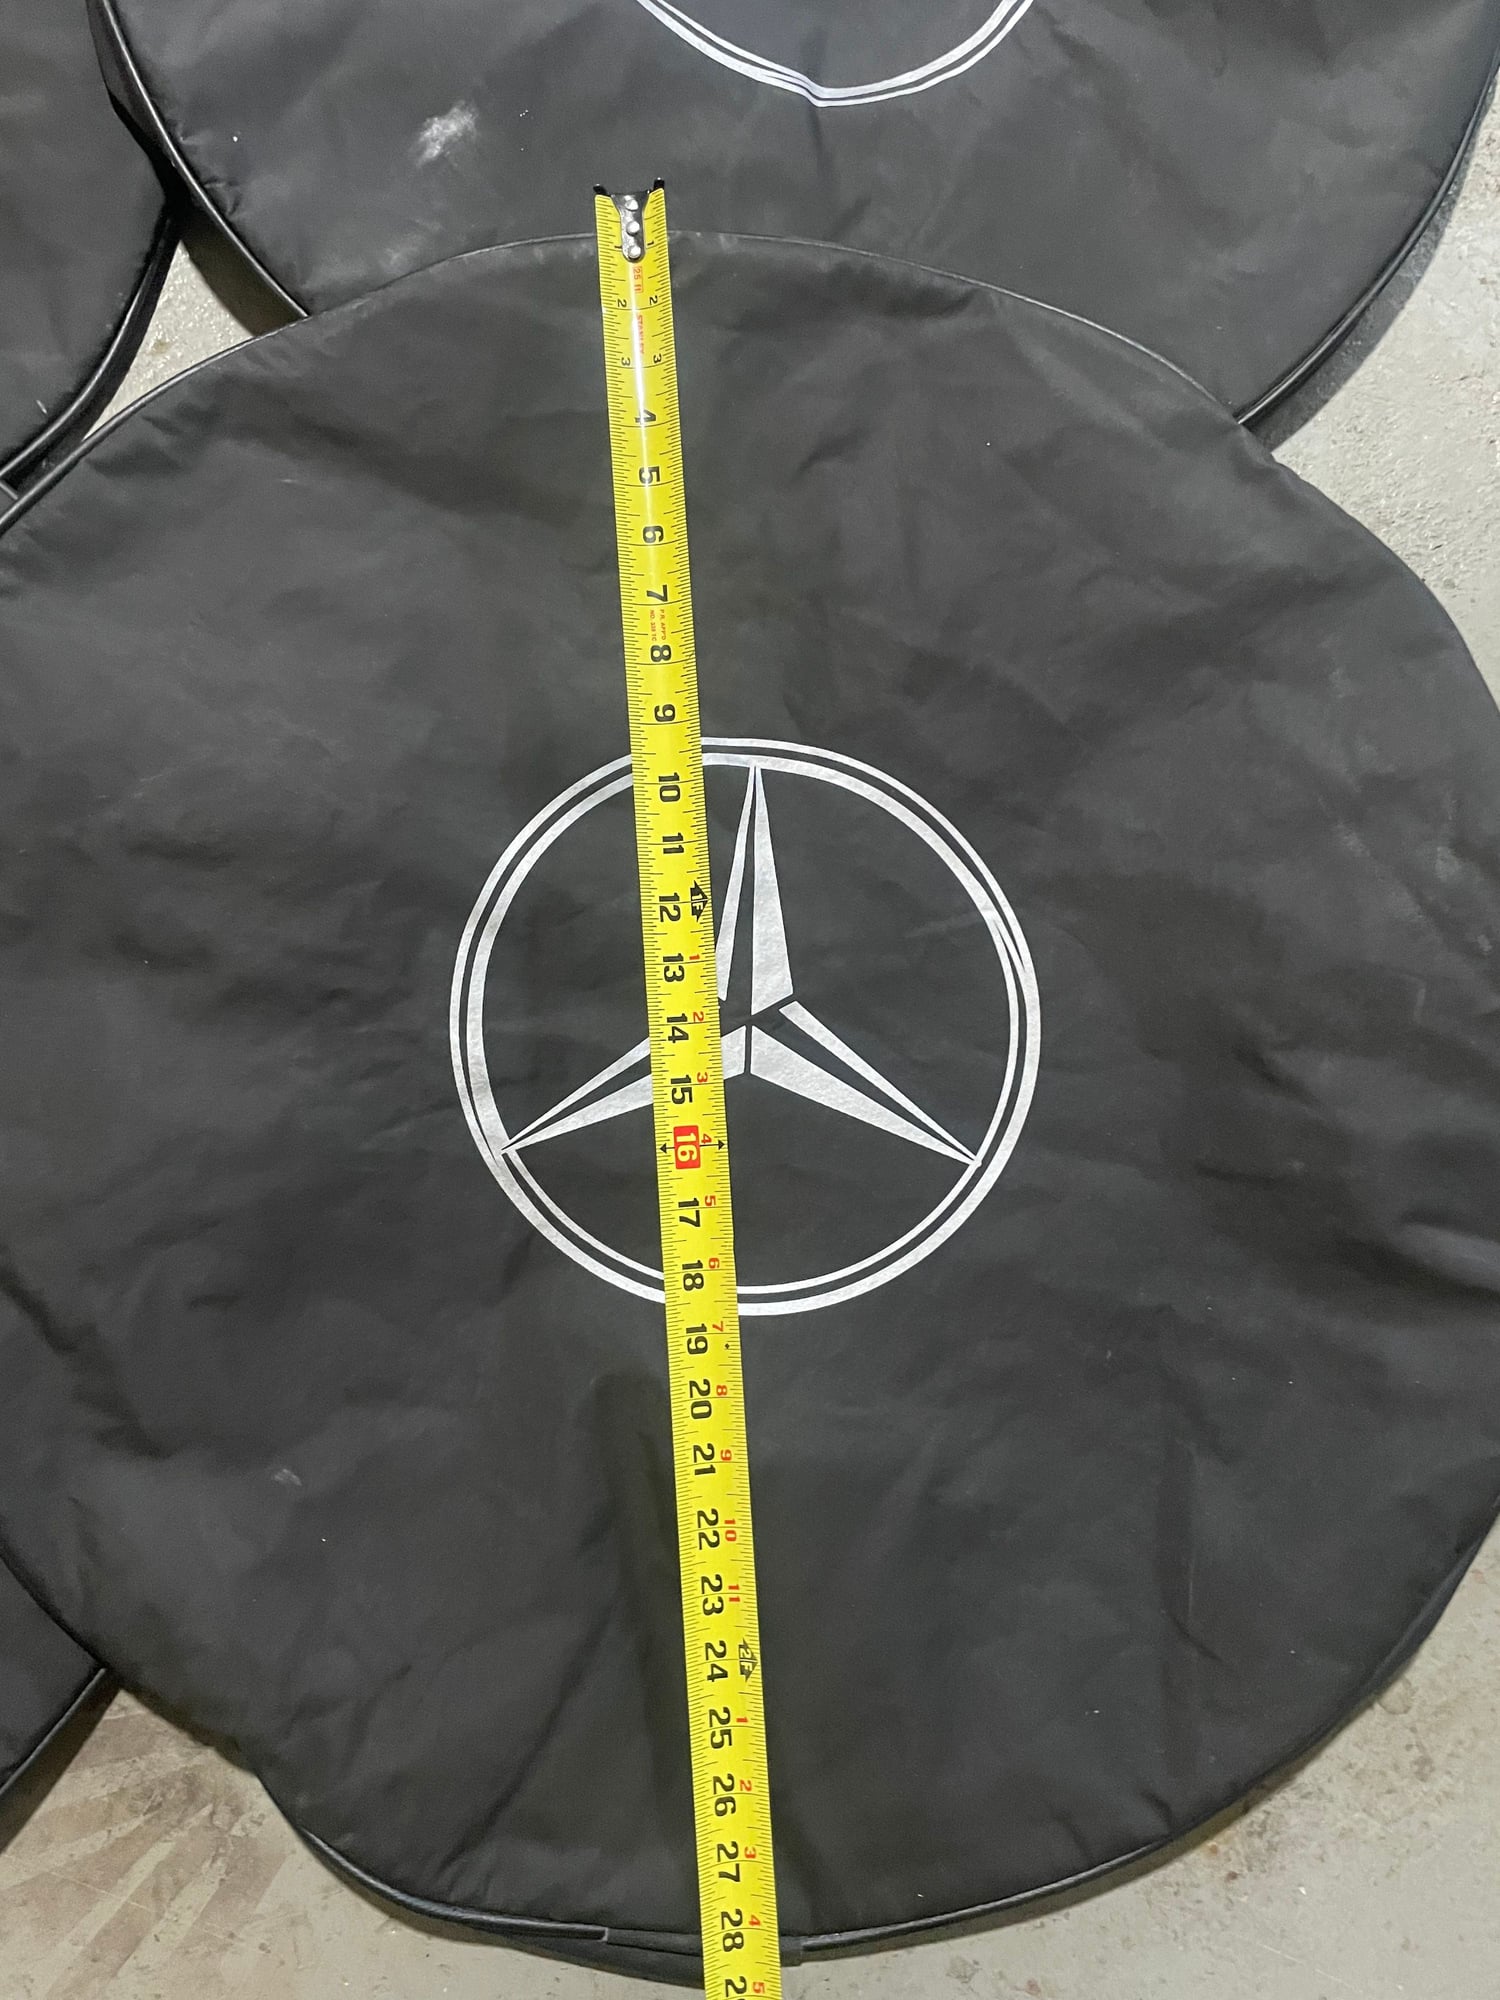 Accessories - Original Mercedes Wheel/Tire covers - Used - 2023 Mercedes-Benz All Models - Queens, NY 11378, United States